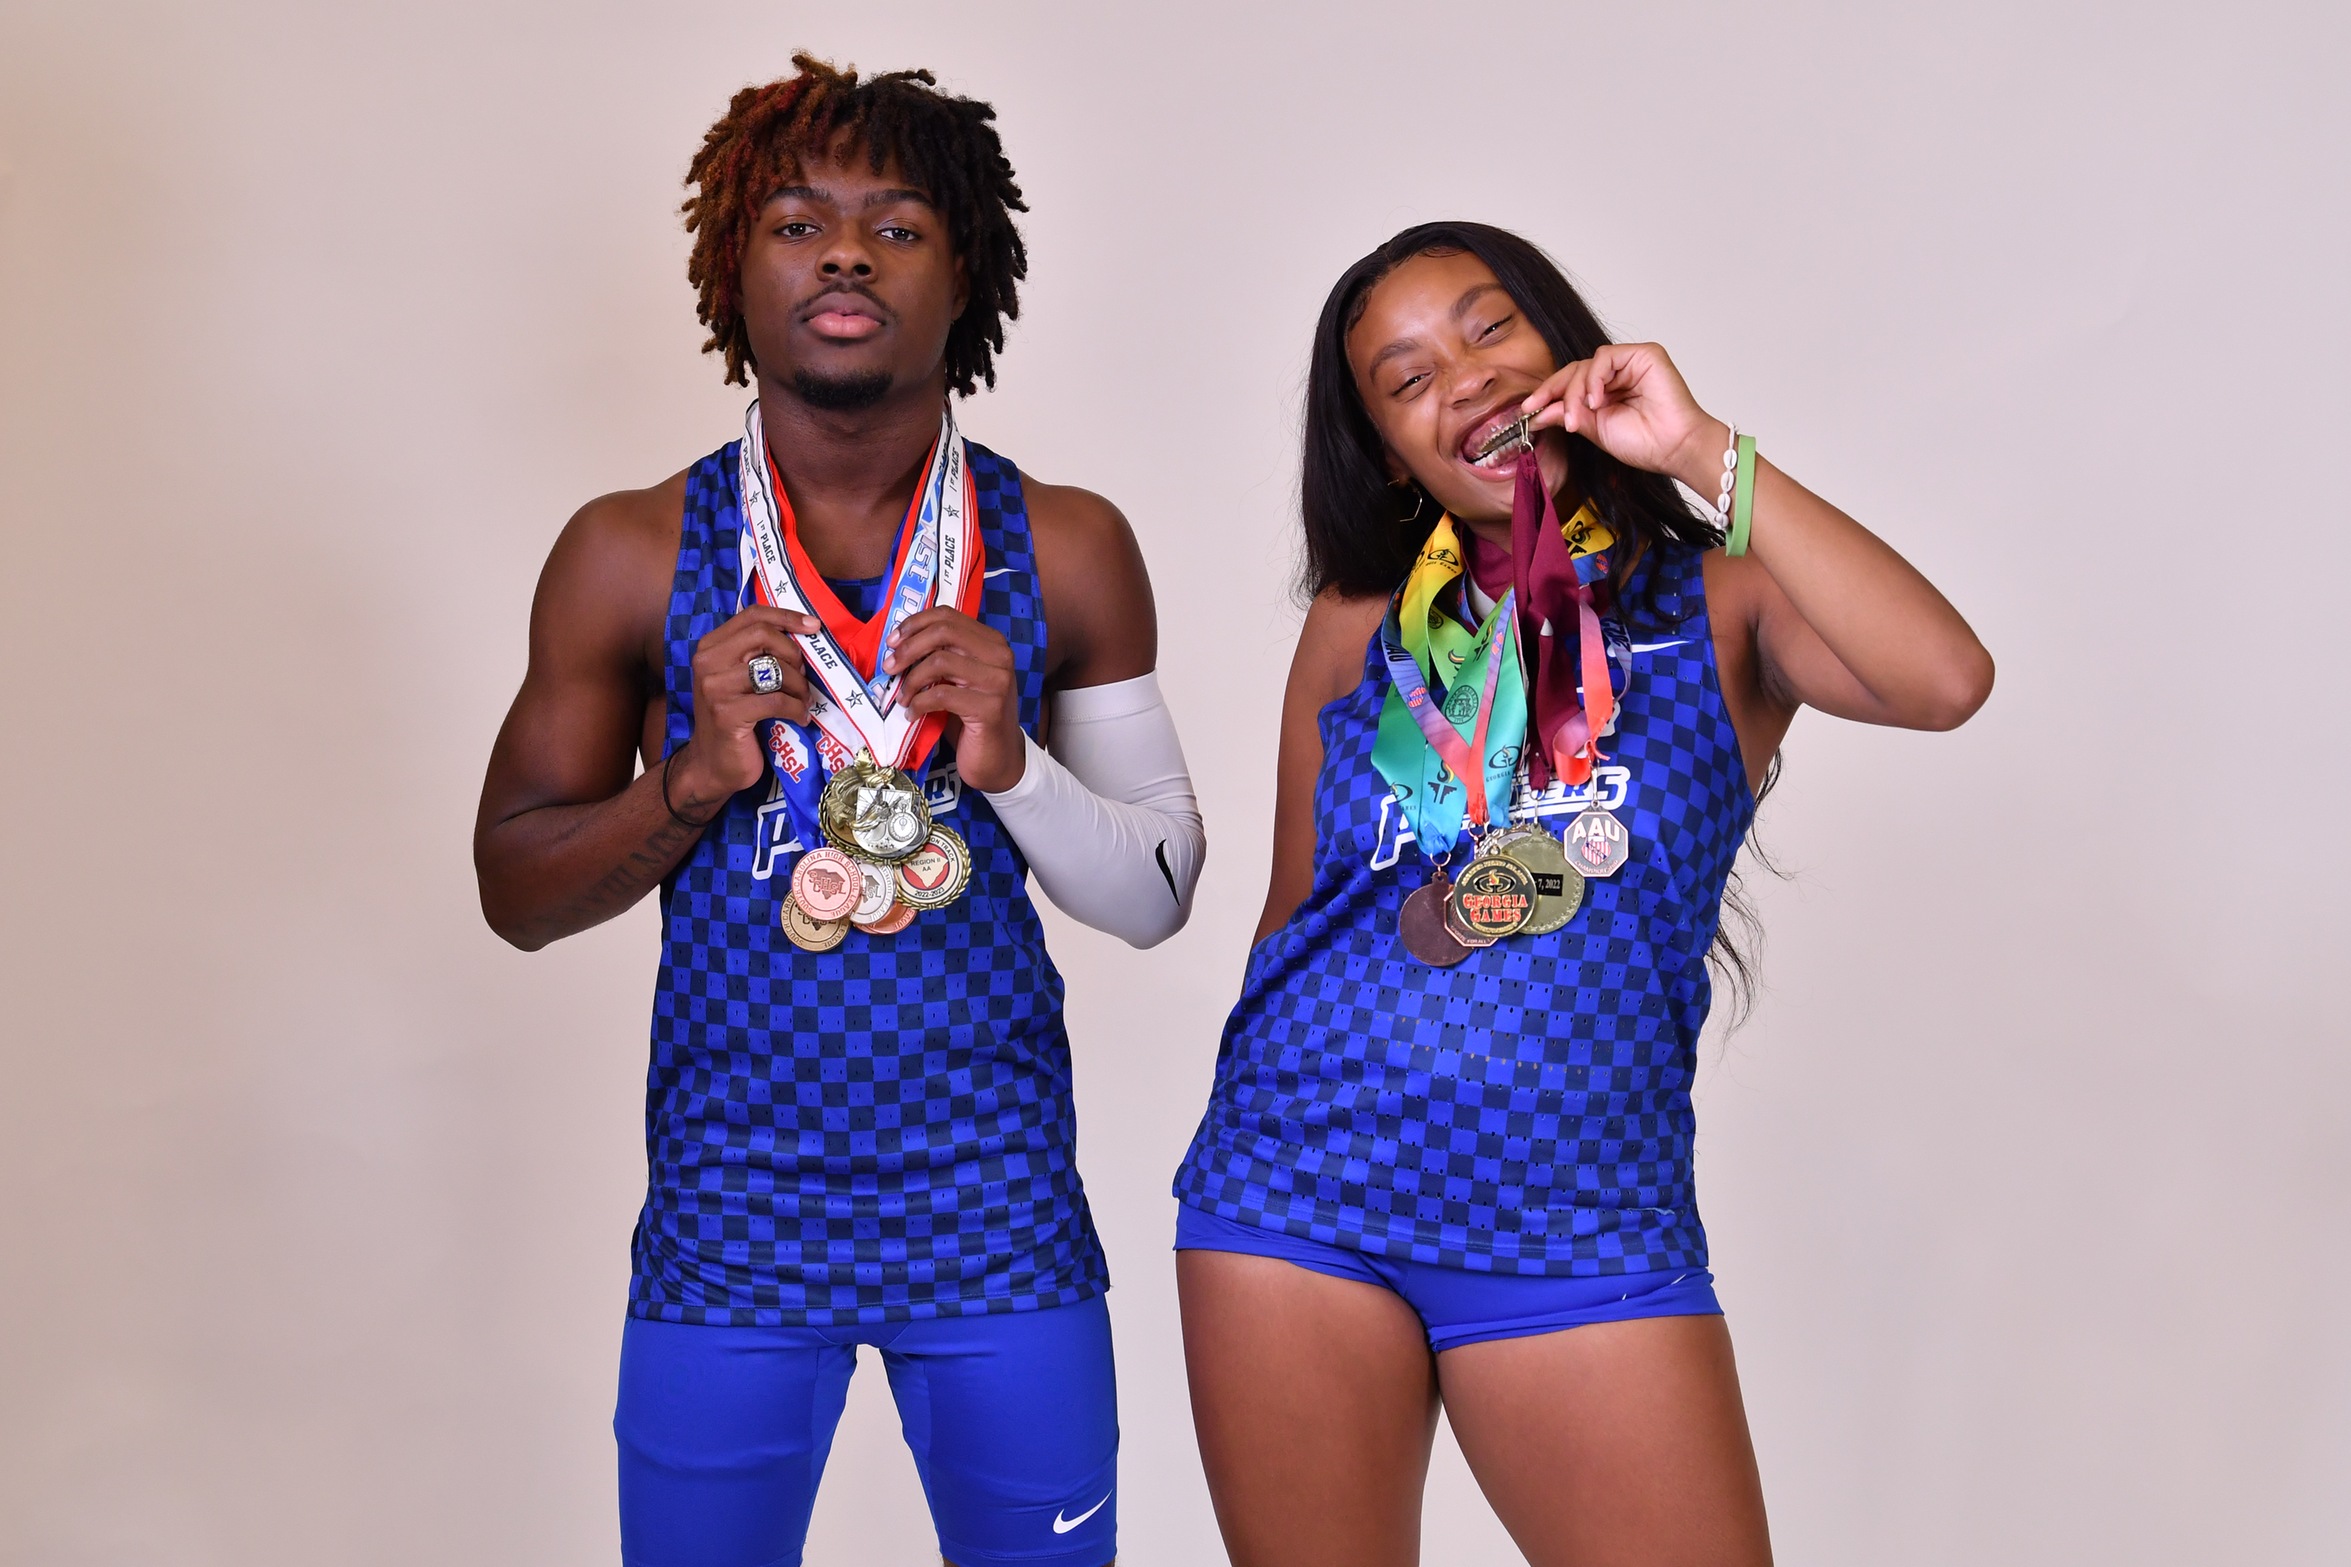 Record Setting Year Continues for SMC Track & Field